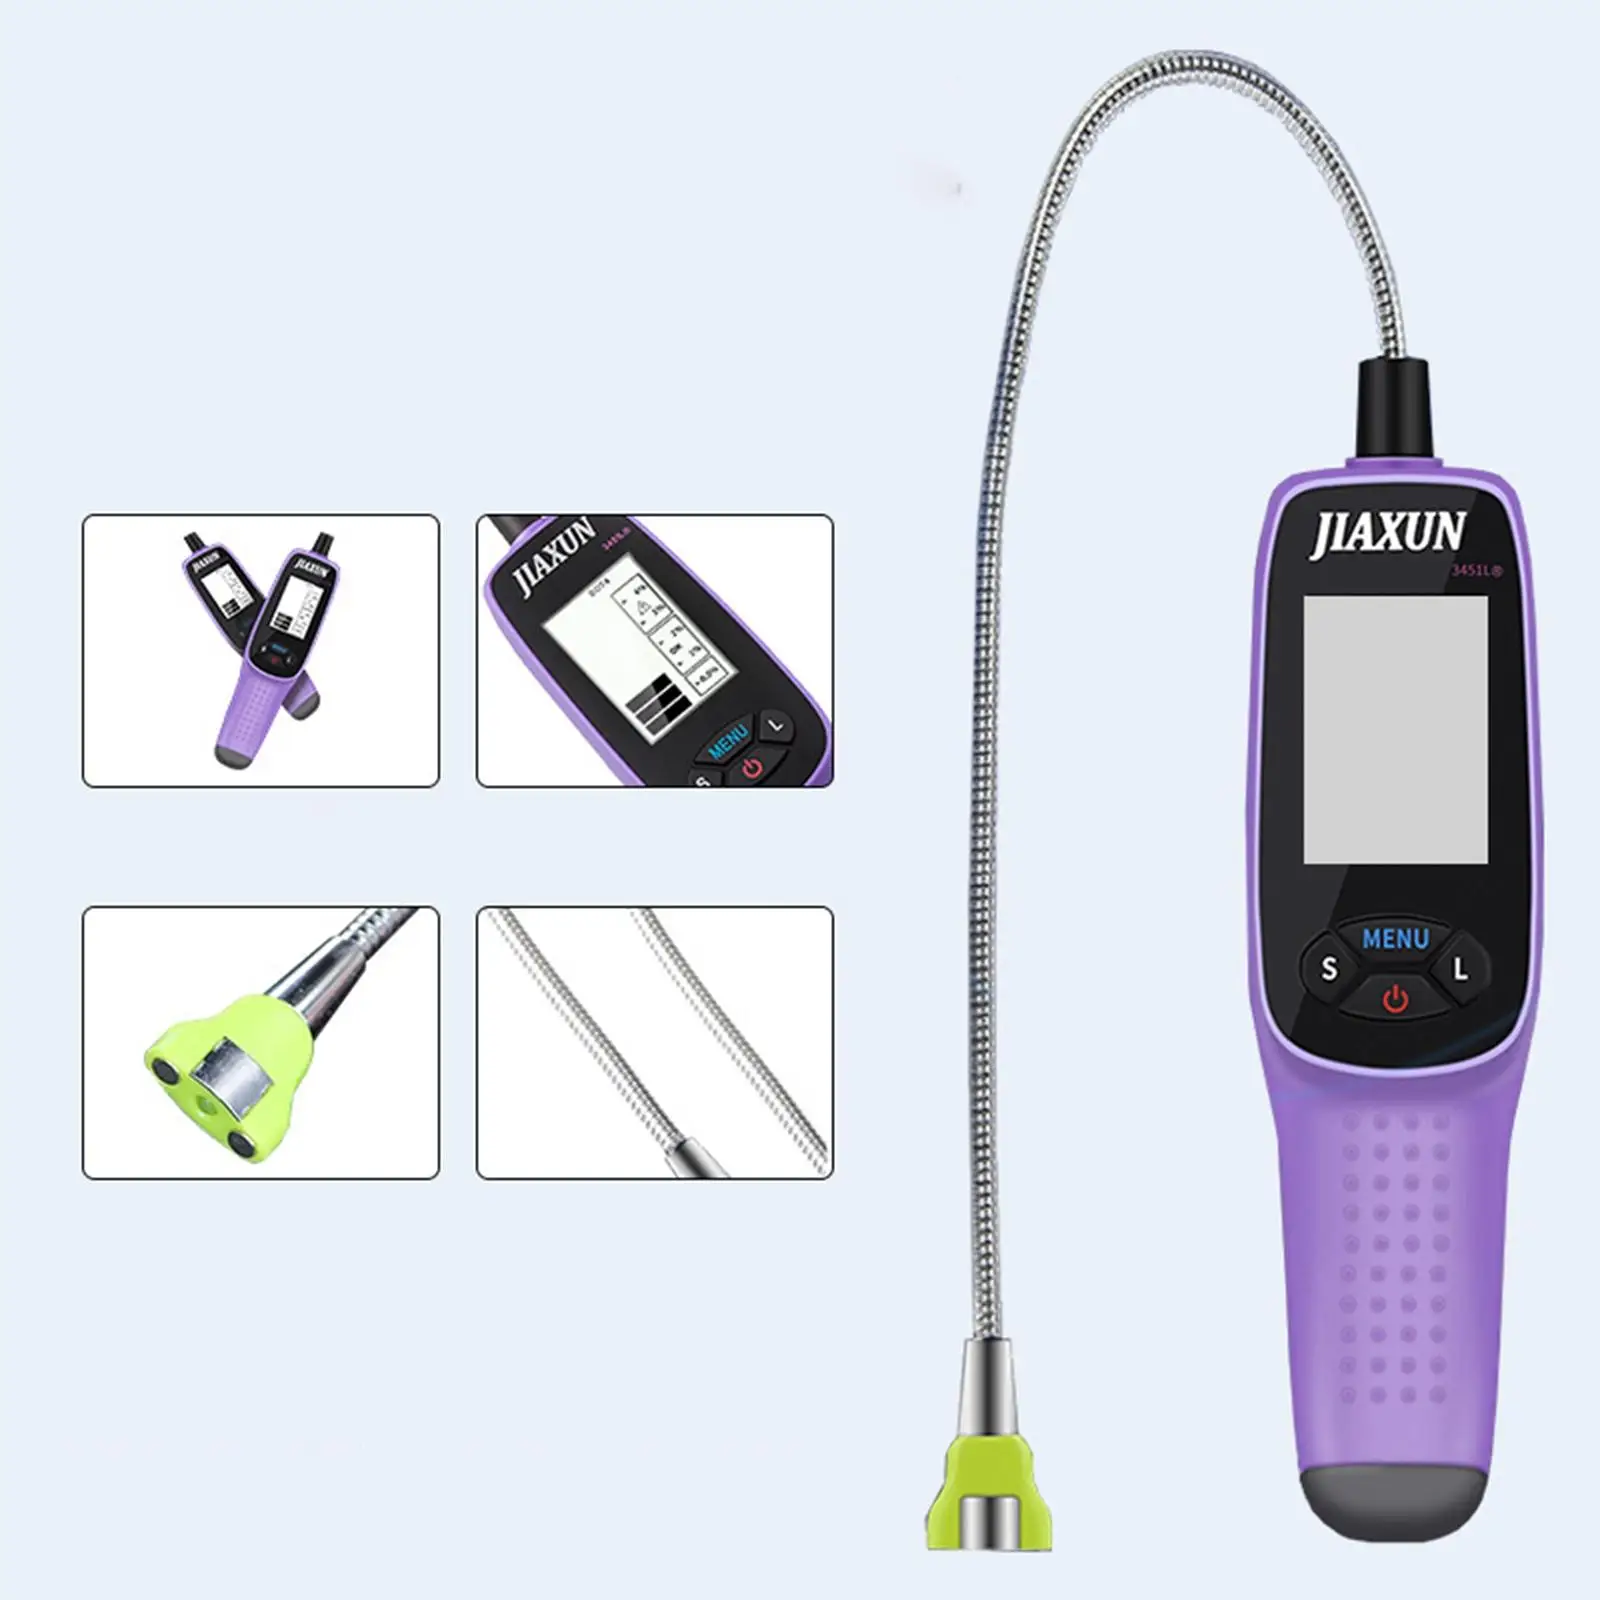 Brake Fluid Tester, 300mm Long Probe with LCD Screen Fits for Dot4